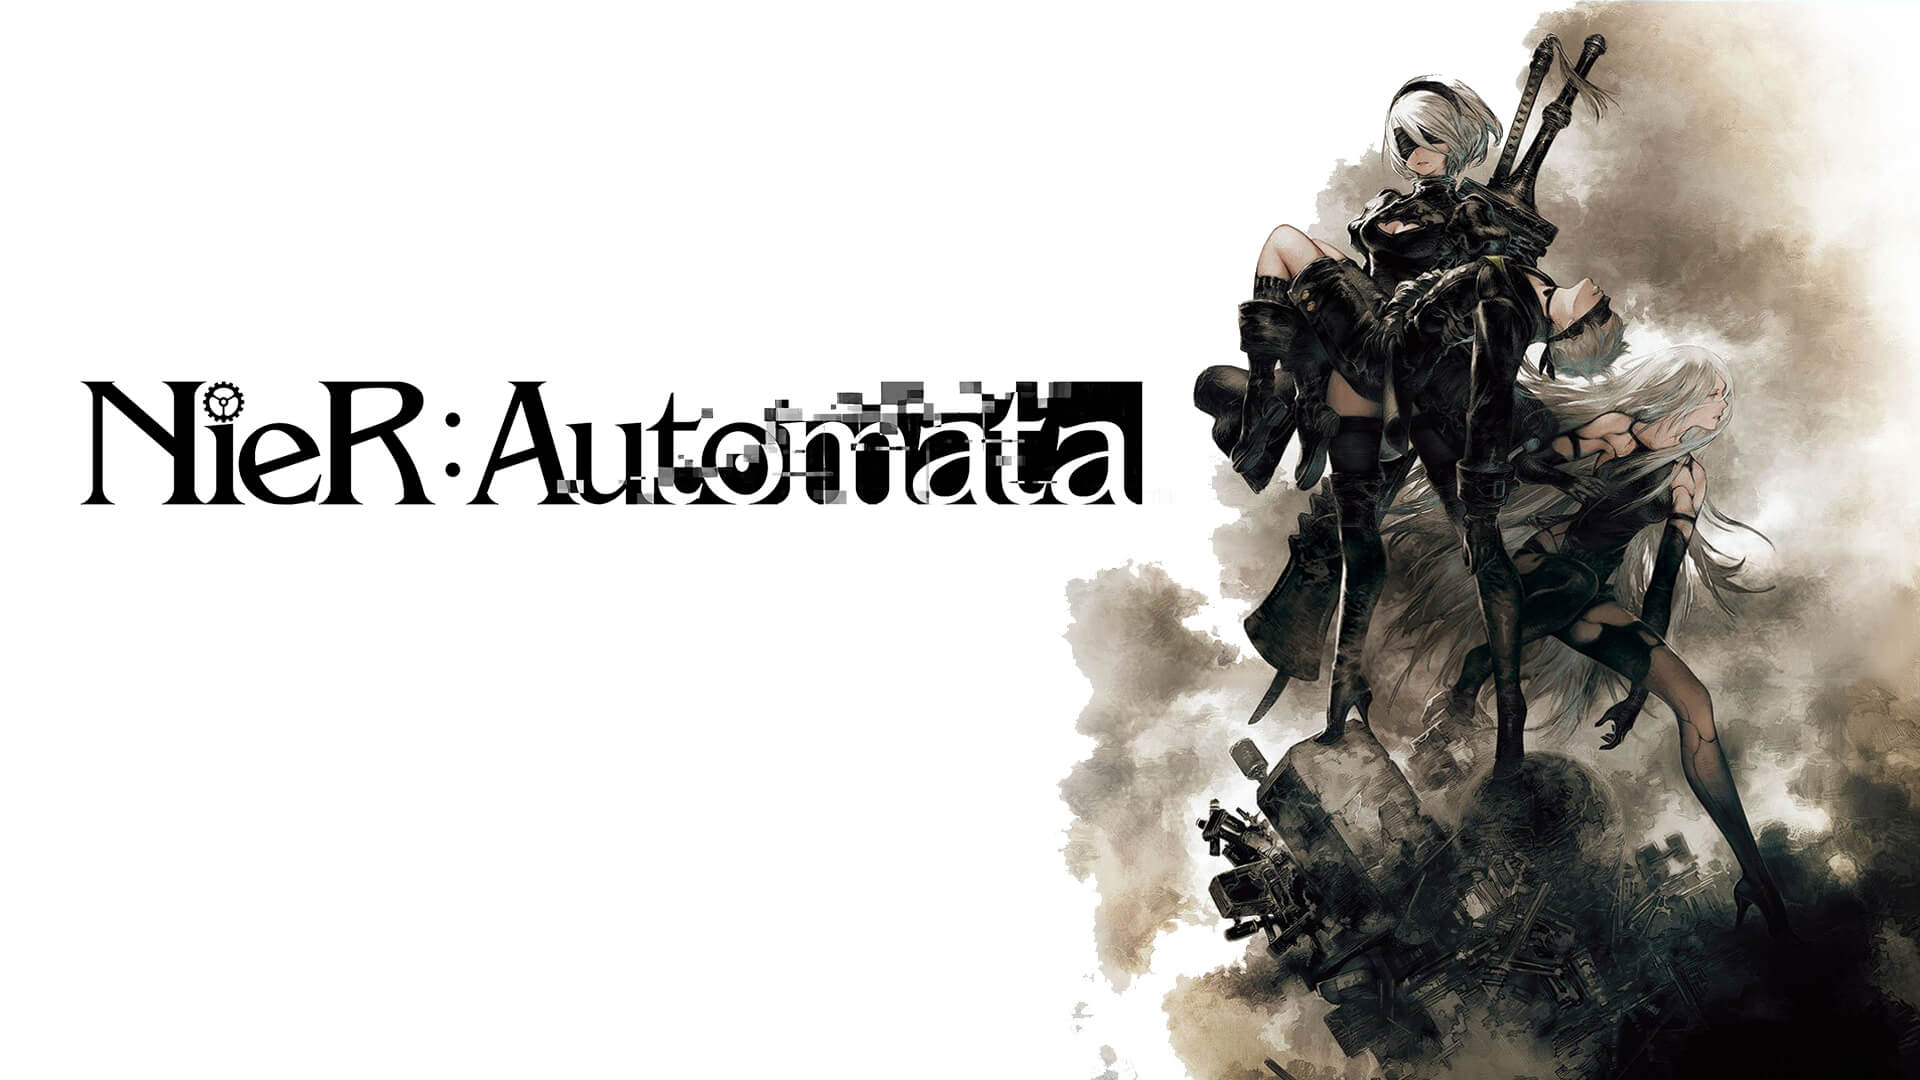 How NieR Replicant ver.1.22474487139 connects to NieR:Automata